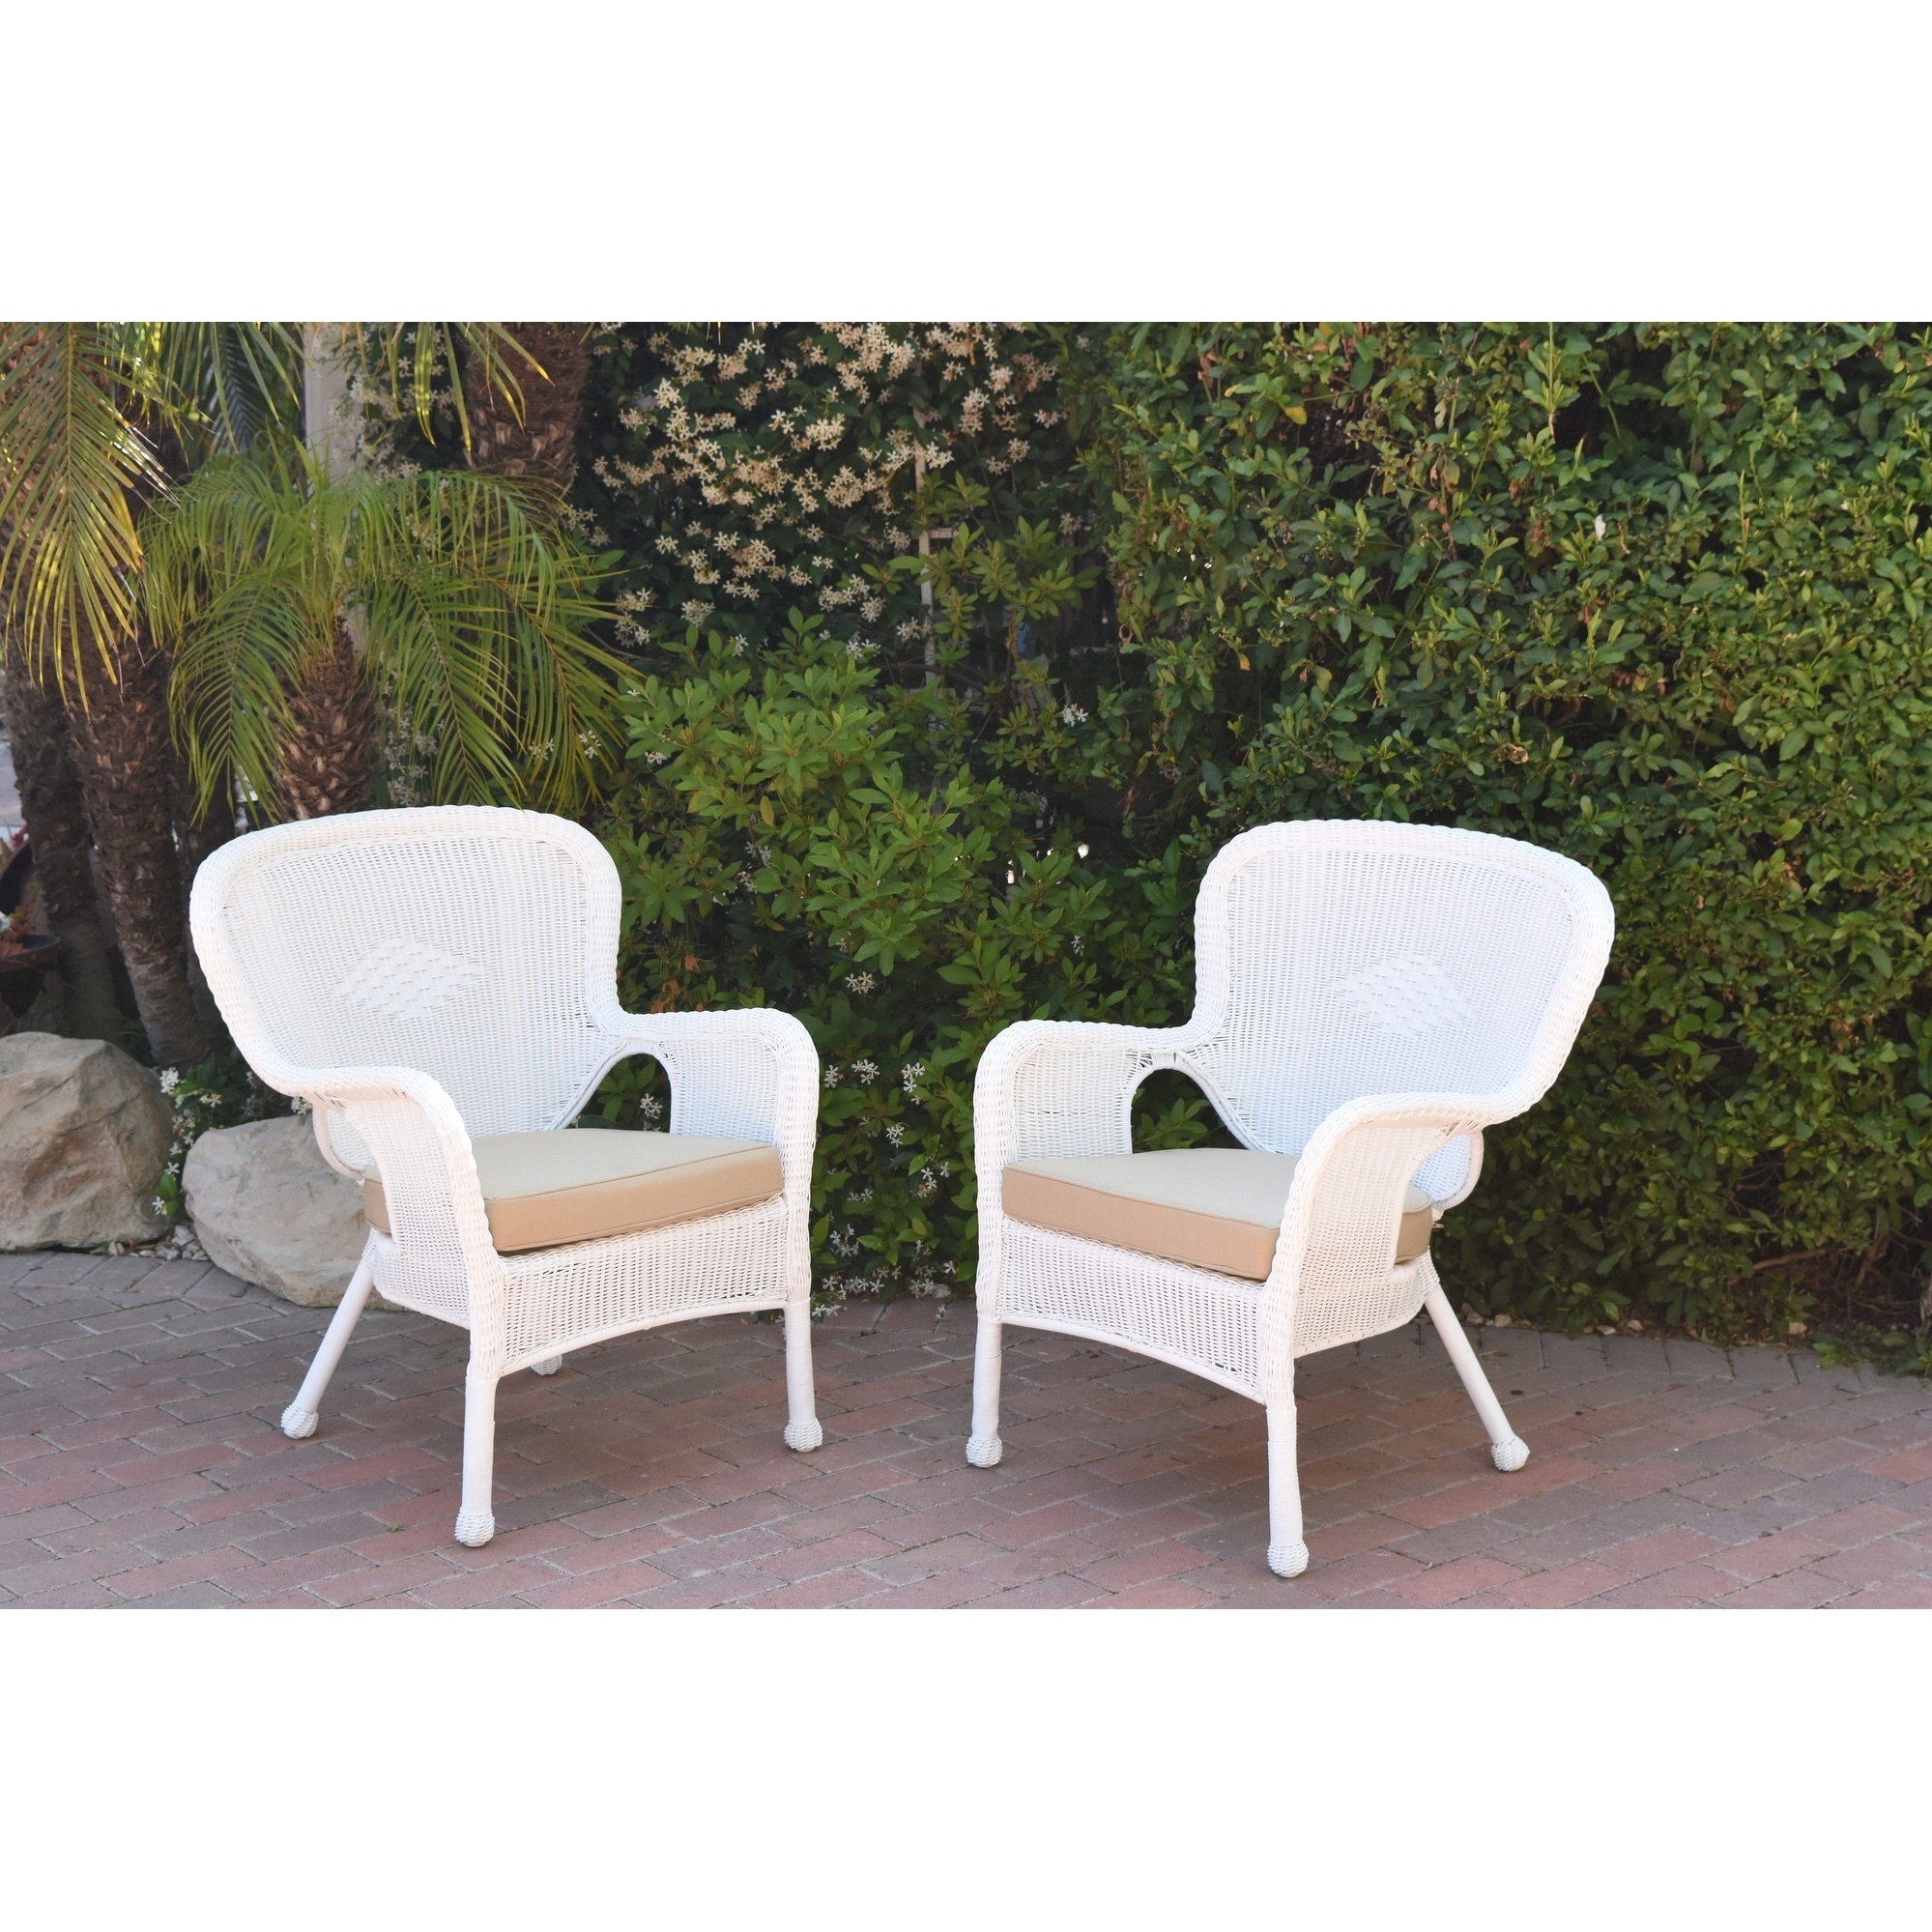 Set Of 2 Windsor White Resin Wicker Chair With Cushion